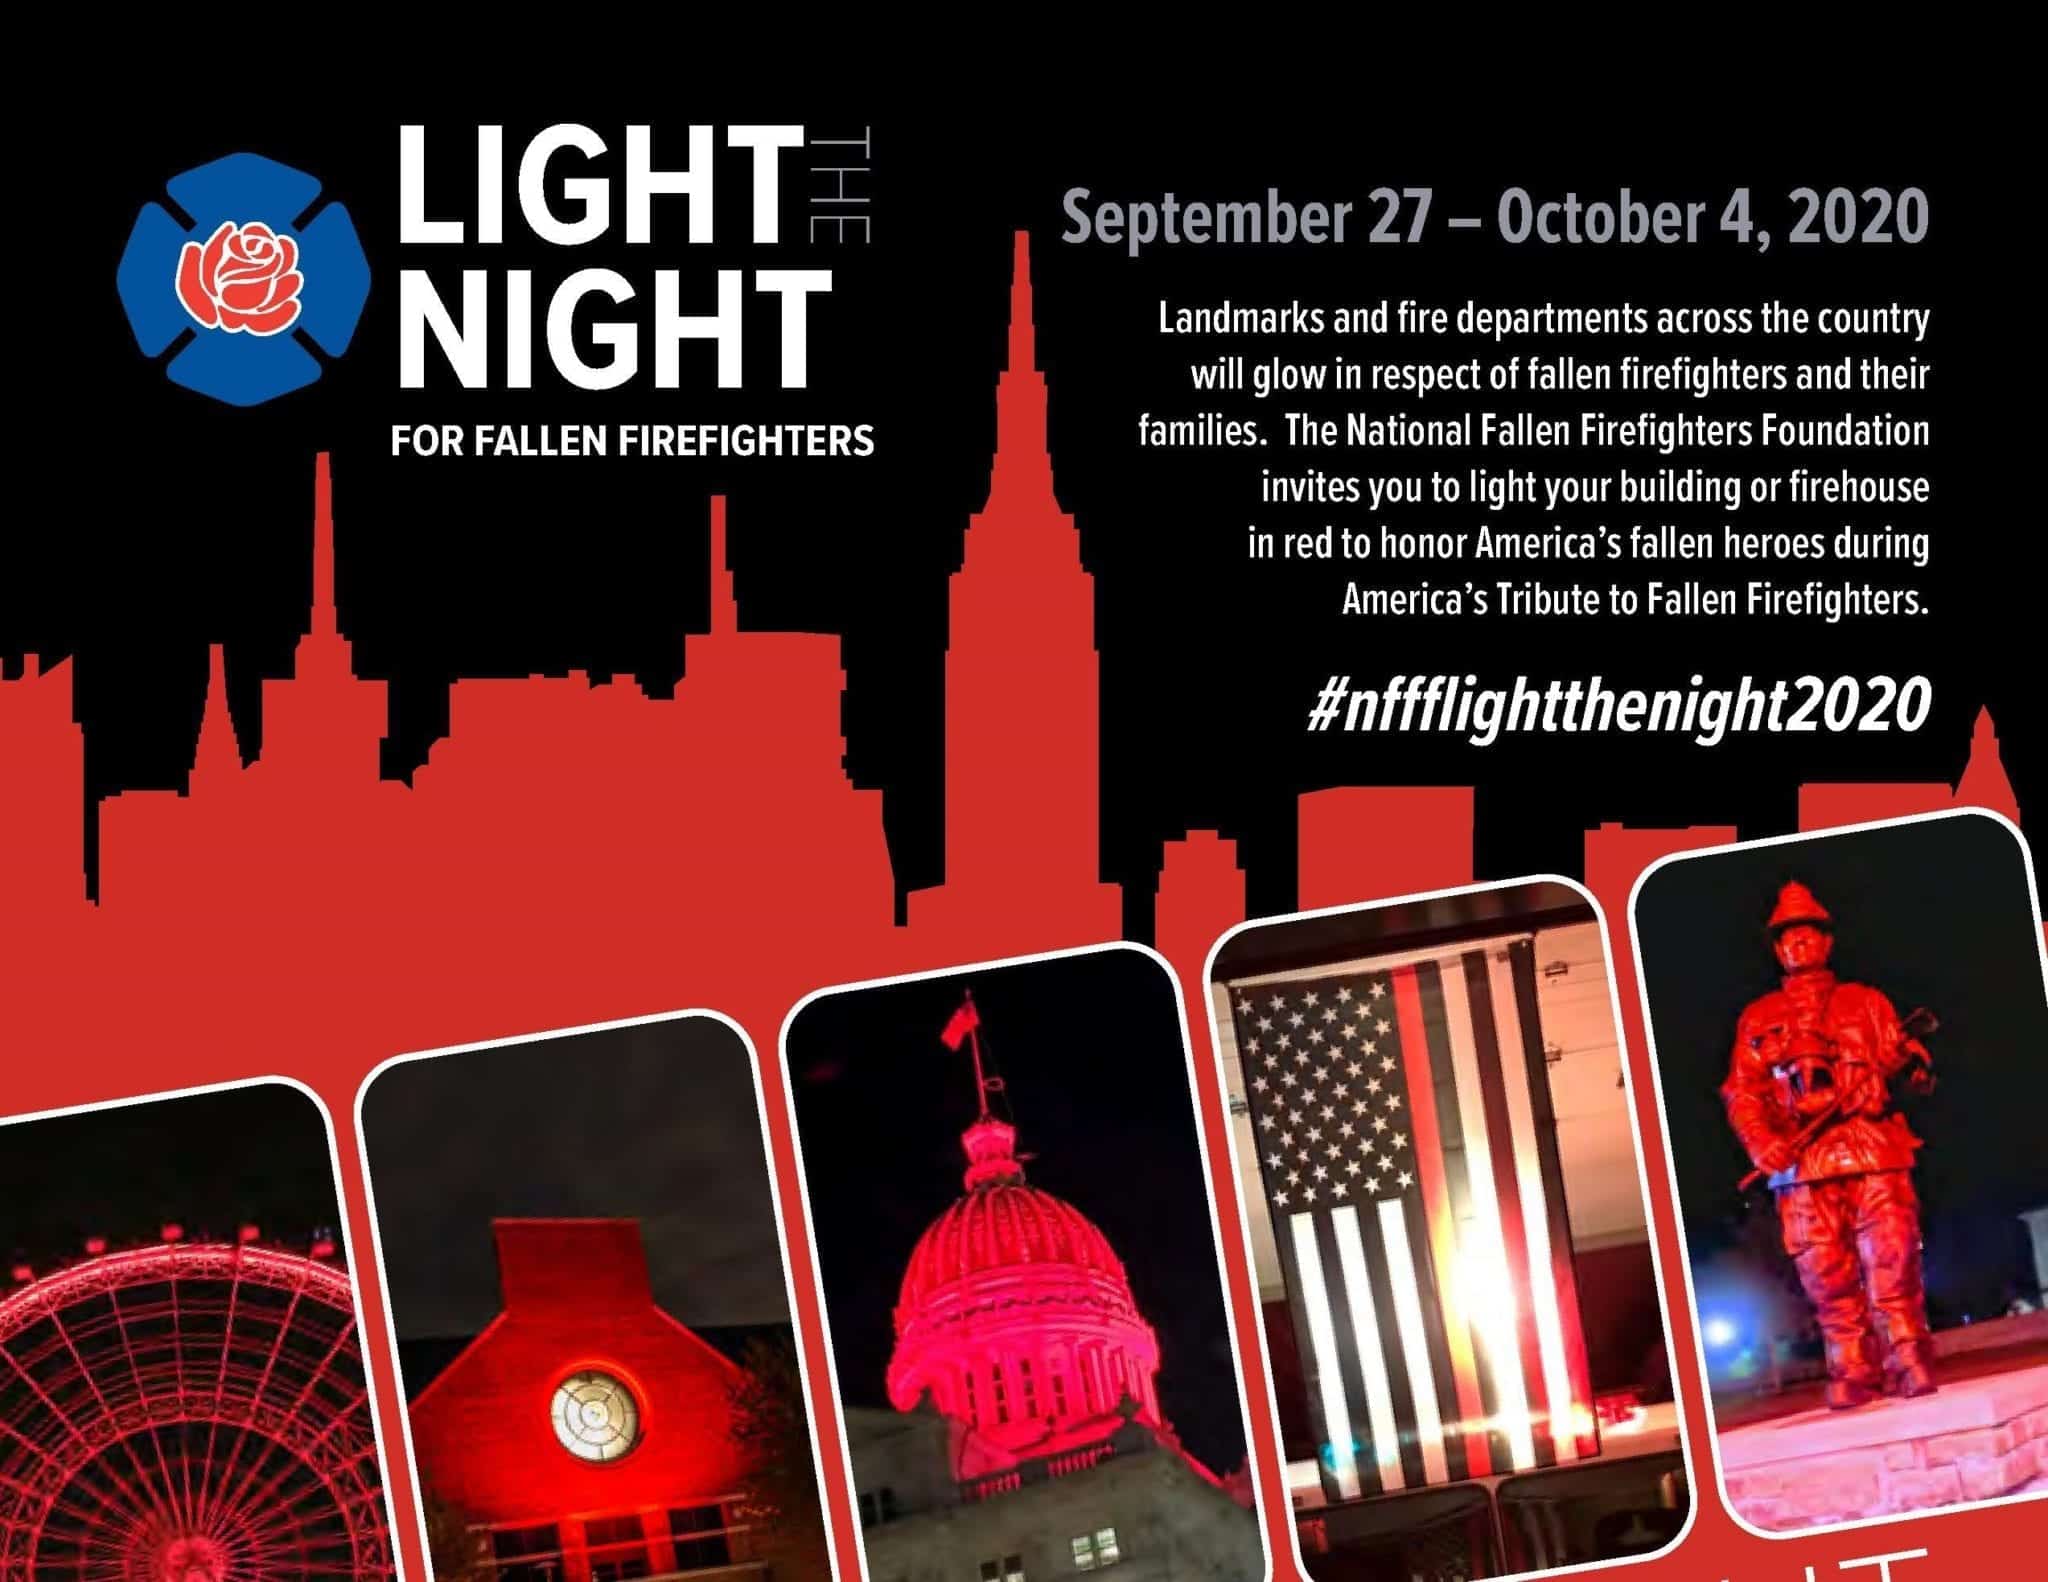 Light the night October 3 to honor fallen firefighters